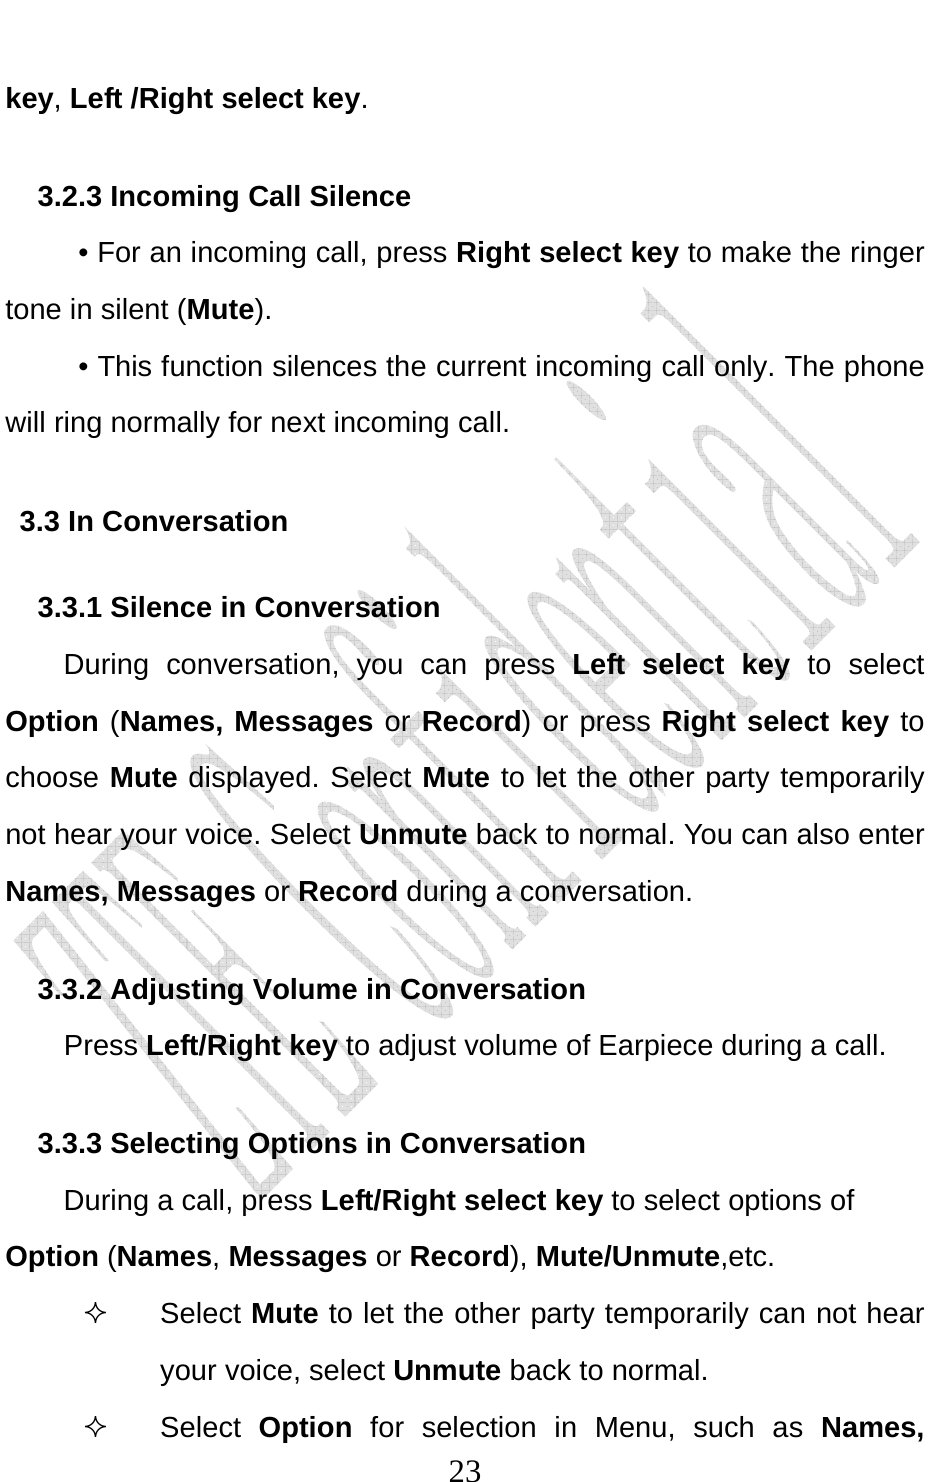                              23key, Left /Right select key. 3.2.3 Incoming Call Silence      • For an incoming call, press Right select key to make the ringer tone in silent (Mute).      • This function silences the current incoming call only. The phone will ring normally for next incoming call. 3.3 In Conversation 3.3.1 Silence in Conversation During conversation, you can press Left select key to select Option (Names, Messages or Record) or press Right select key to choose Mute displayed. Select Mute to let the other party temporarily not hear your voice. Select Unmute back to normal. You can also enter Names, Messages or Record during a conversation. 3.3.2 Adjusting Volume in Conversation     Press Left/Right key to adjust volume of Earpiece during a call. 3.3.3 Selecting Options in Conversation During a call, press Left/Right select key to select options of Option (Names, Messages or Record), Mute/Unmute,etc.  Select Mute to let the other party temporarily can not hear your voice, select Unmute back to normal.  Select Option  for selection in Menu, such as Names, 